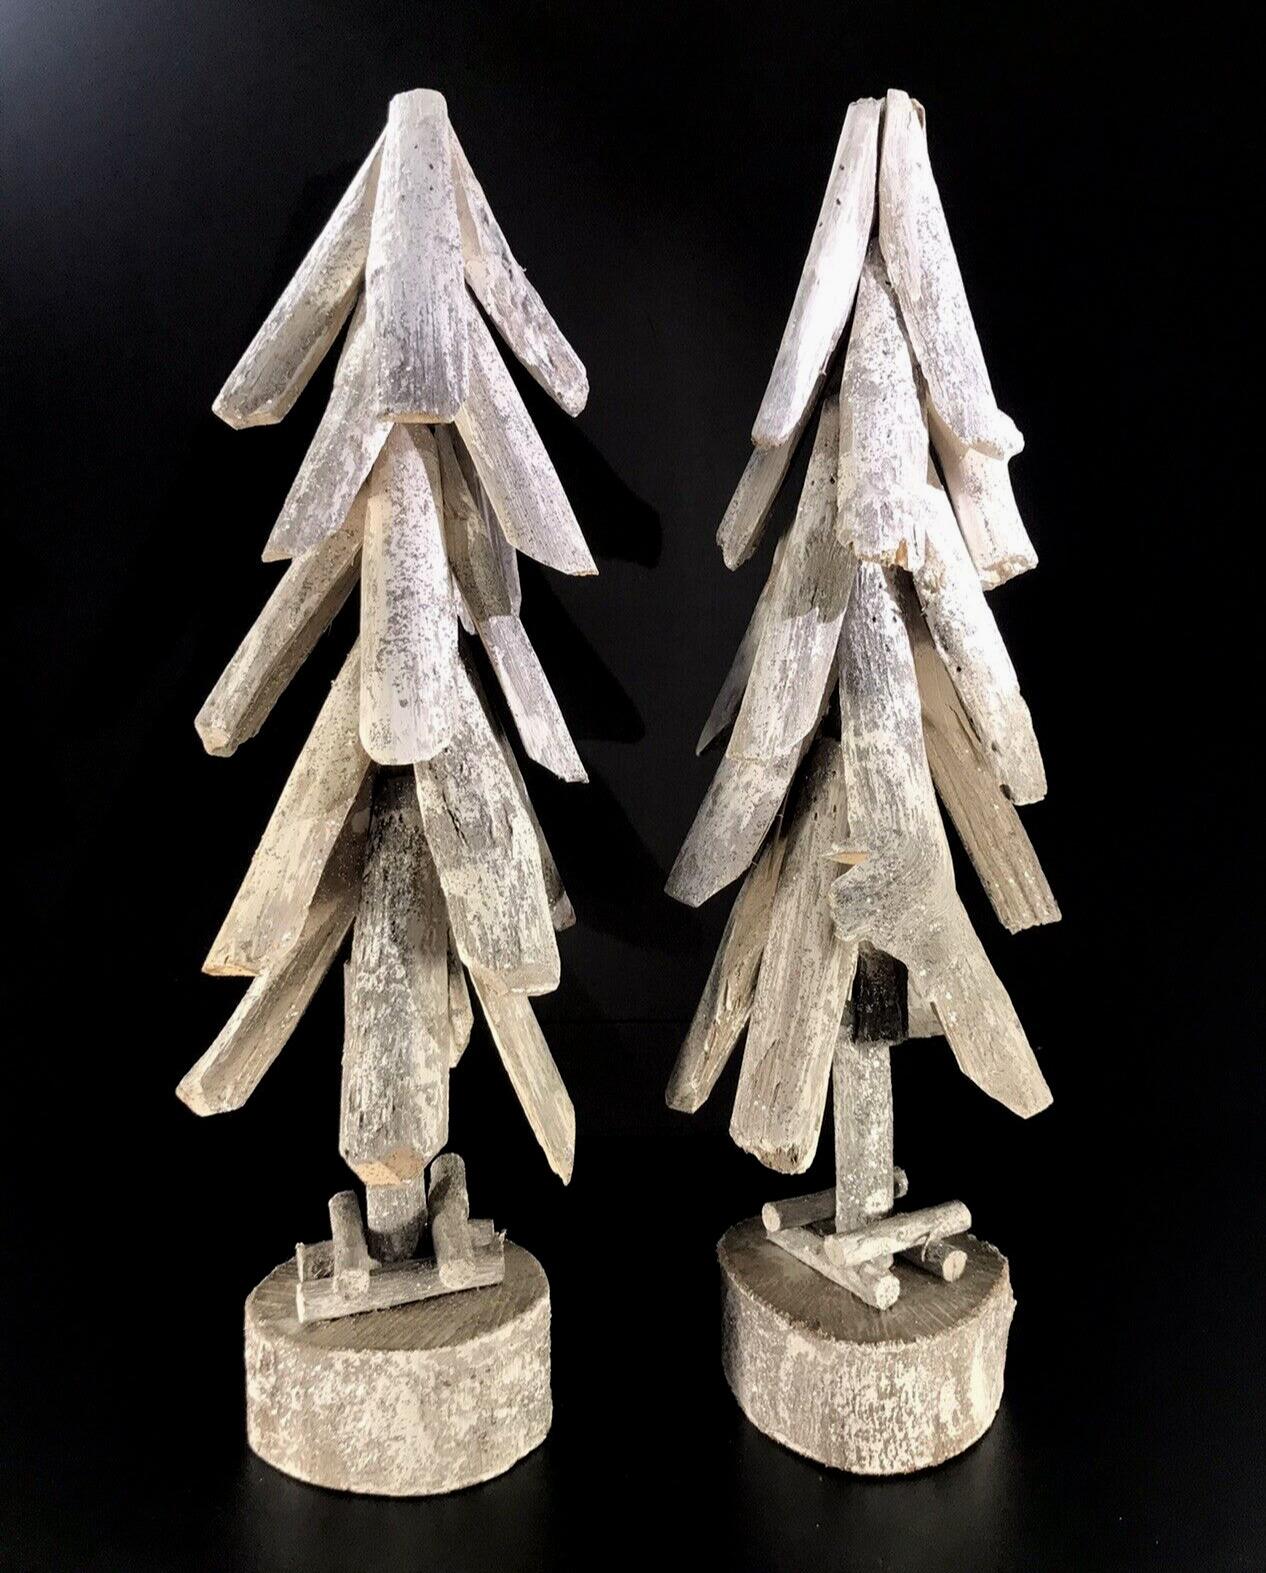 PAIR WHITE WOOD CHRISTMAS TREES - TABLETOP HANDMADE COUNRTY PRIMITIVE RUSTIC 18